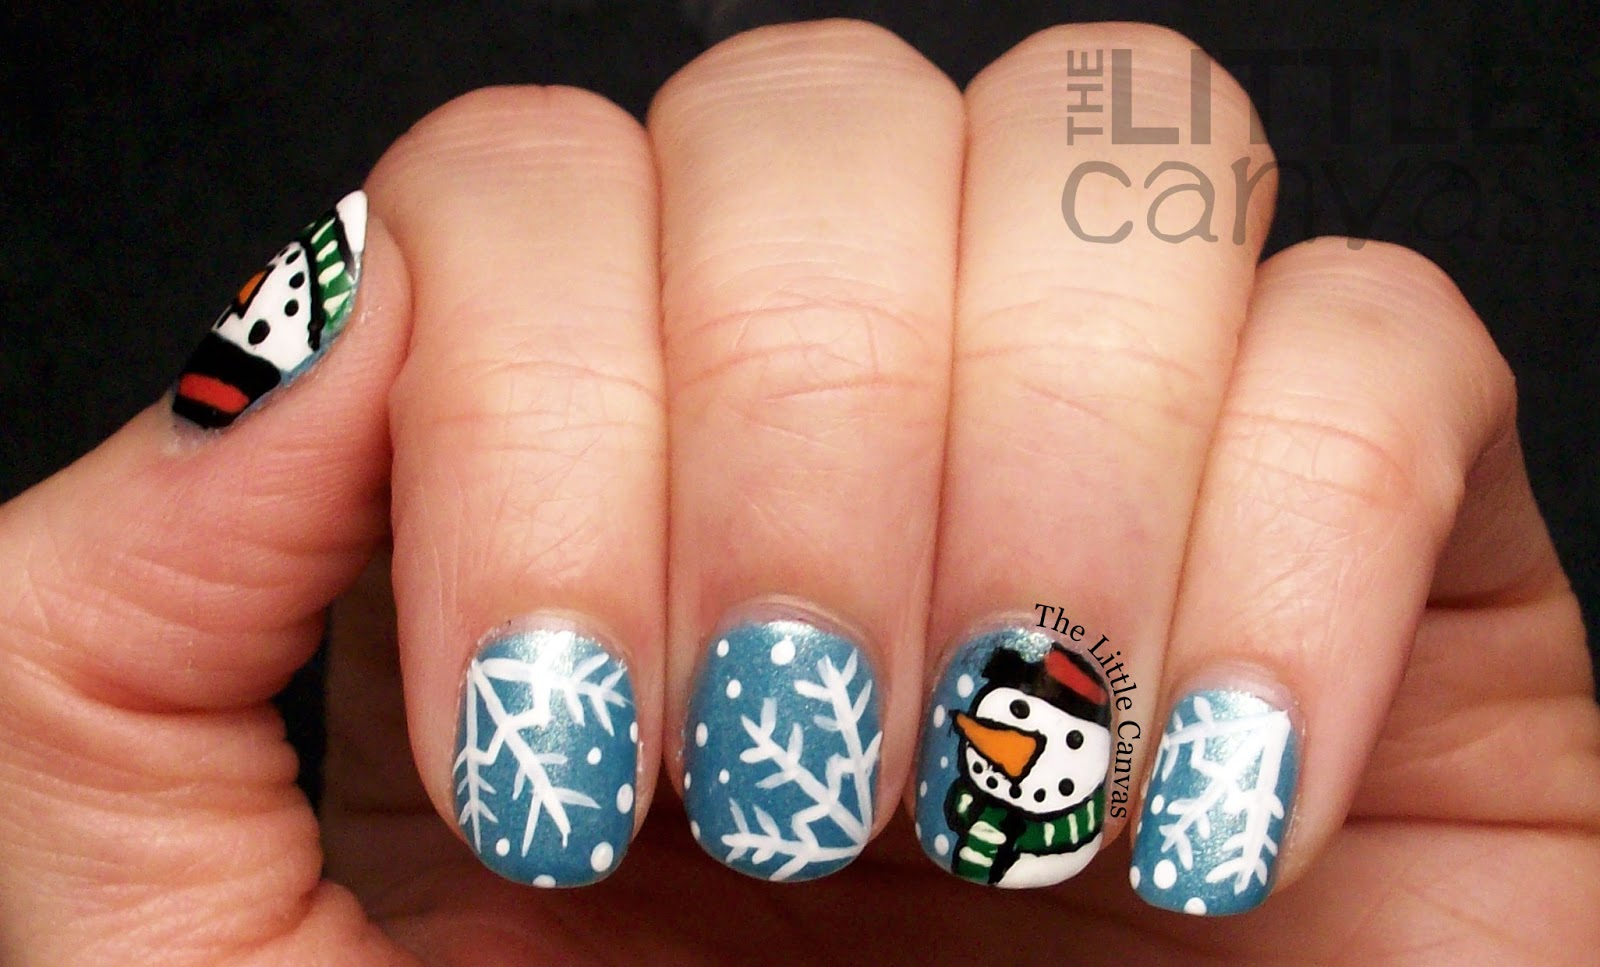 Snowman Nail Art Inspired by SimplyRins - The Little Canvas